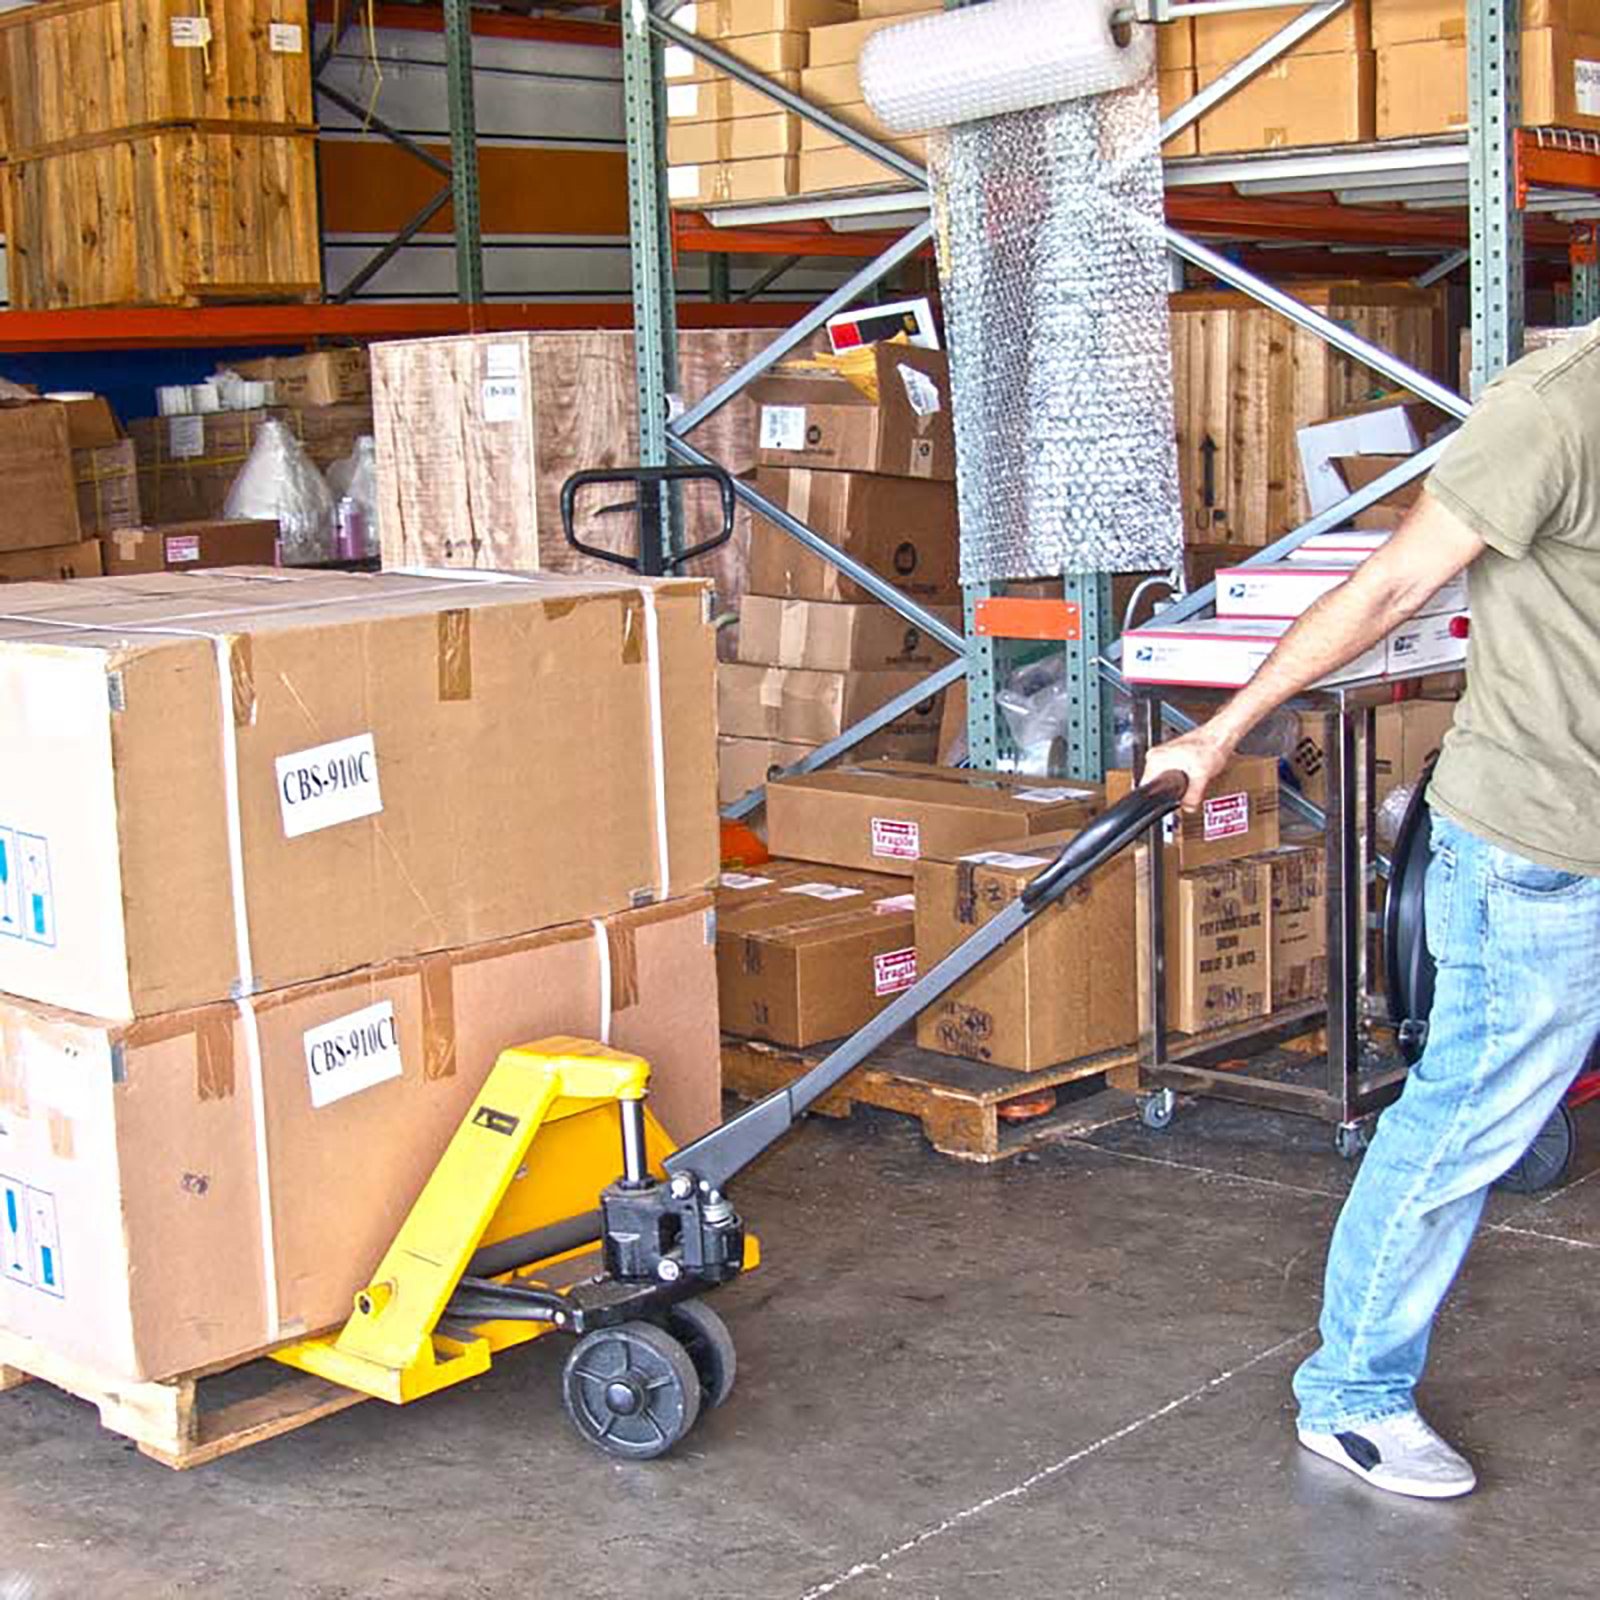 Image shows a person pulling a yellow and black JORESTECH pallet jack truck in a warehouse filled wit boxes.. The pallet jack has several large heavy brown boxes on top. 